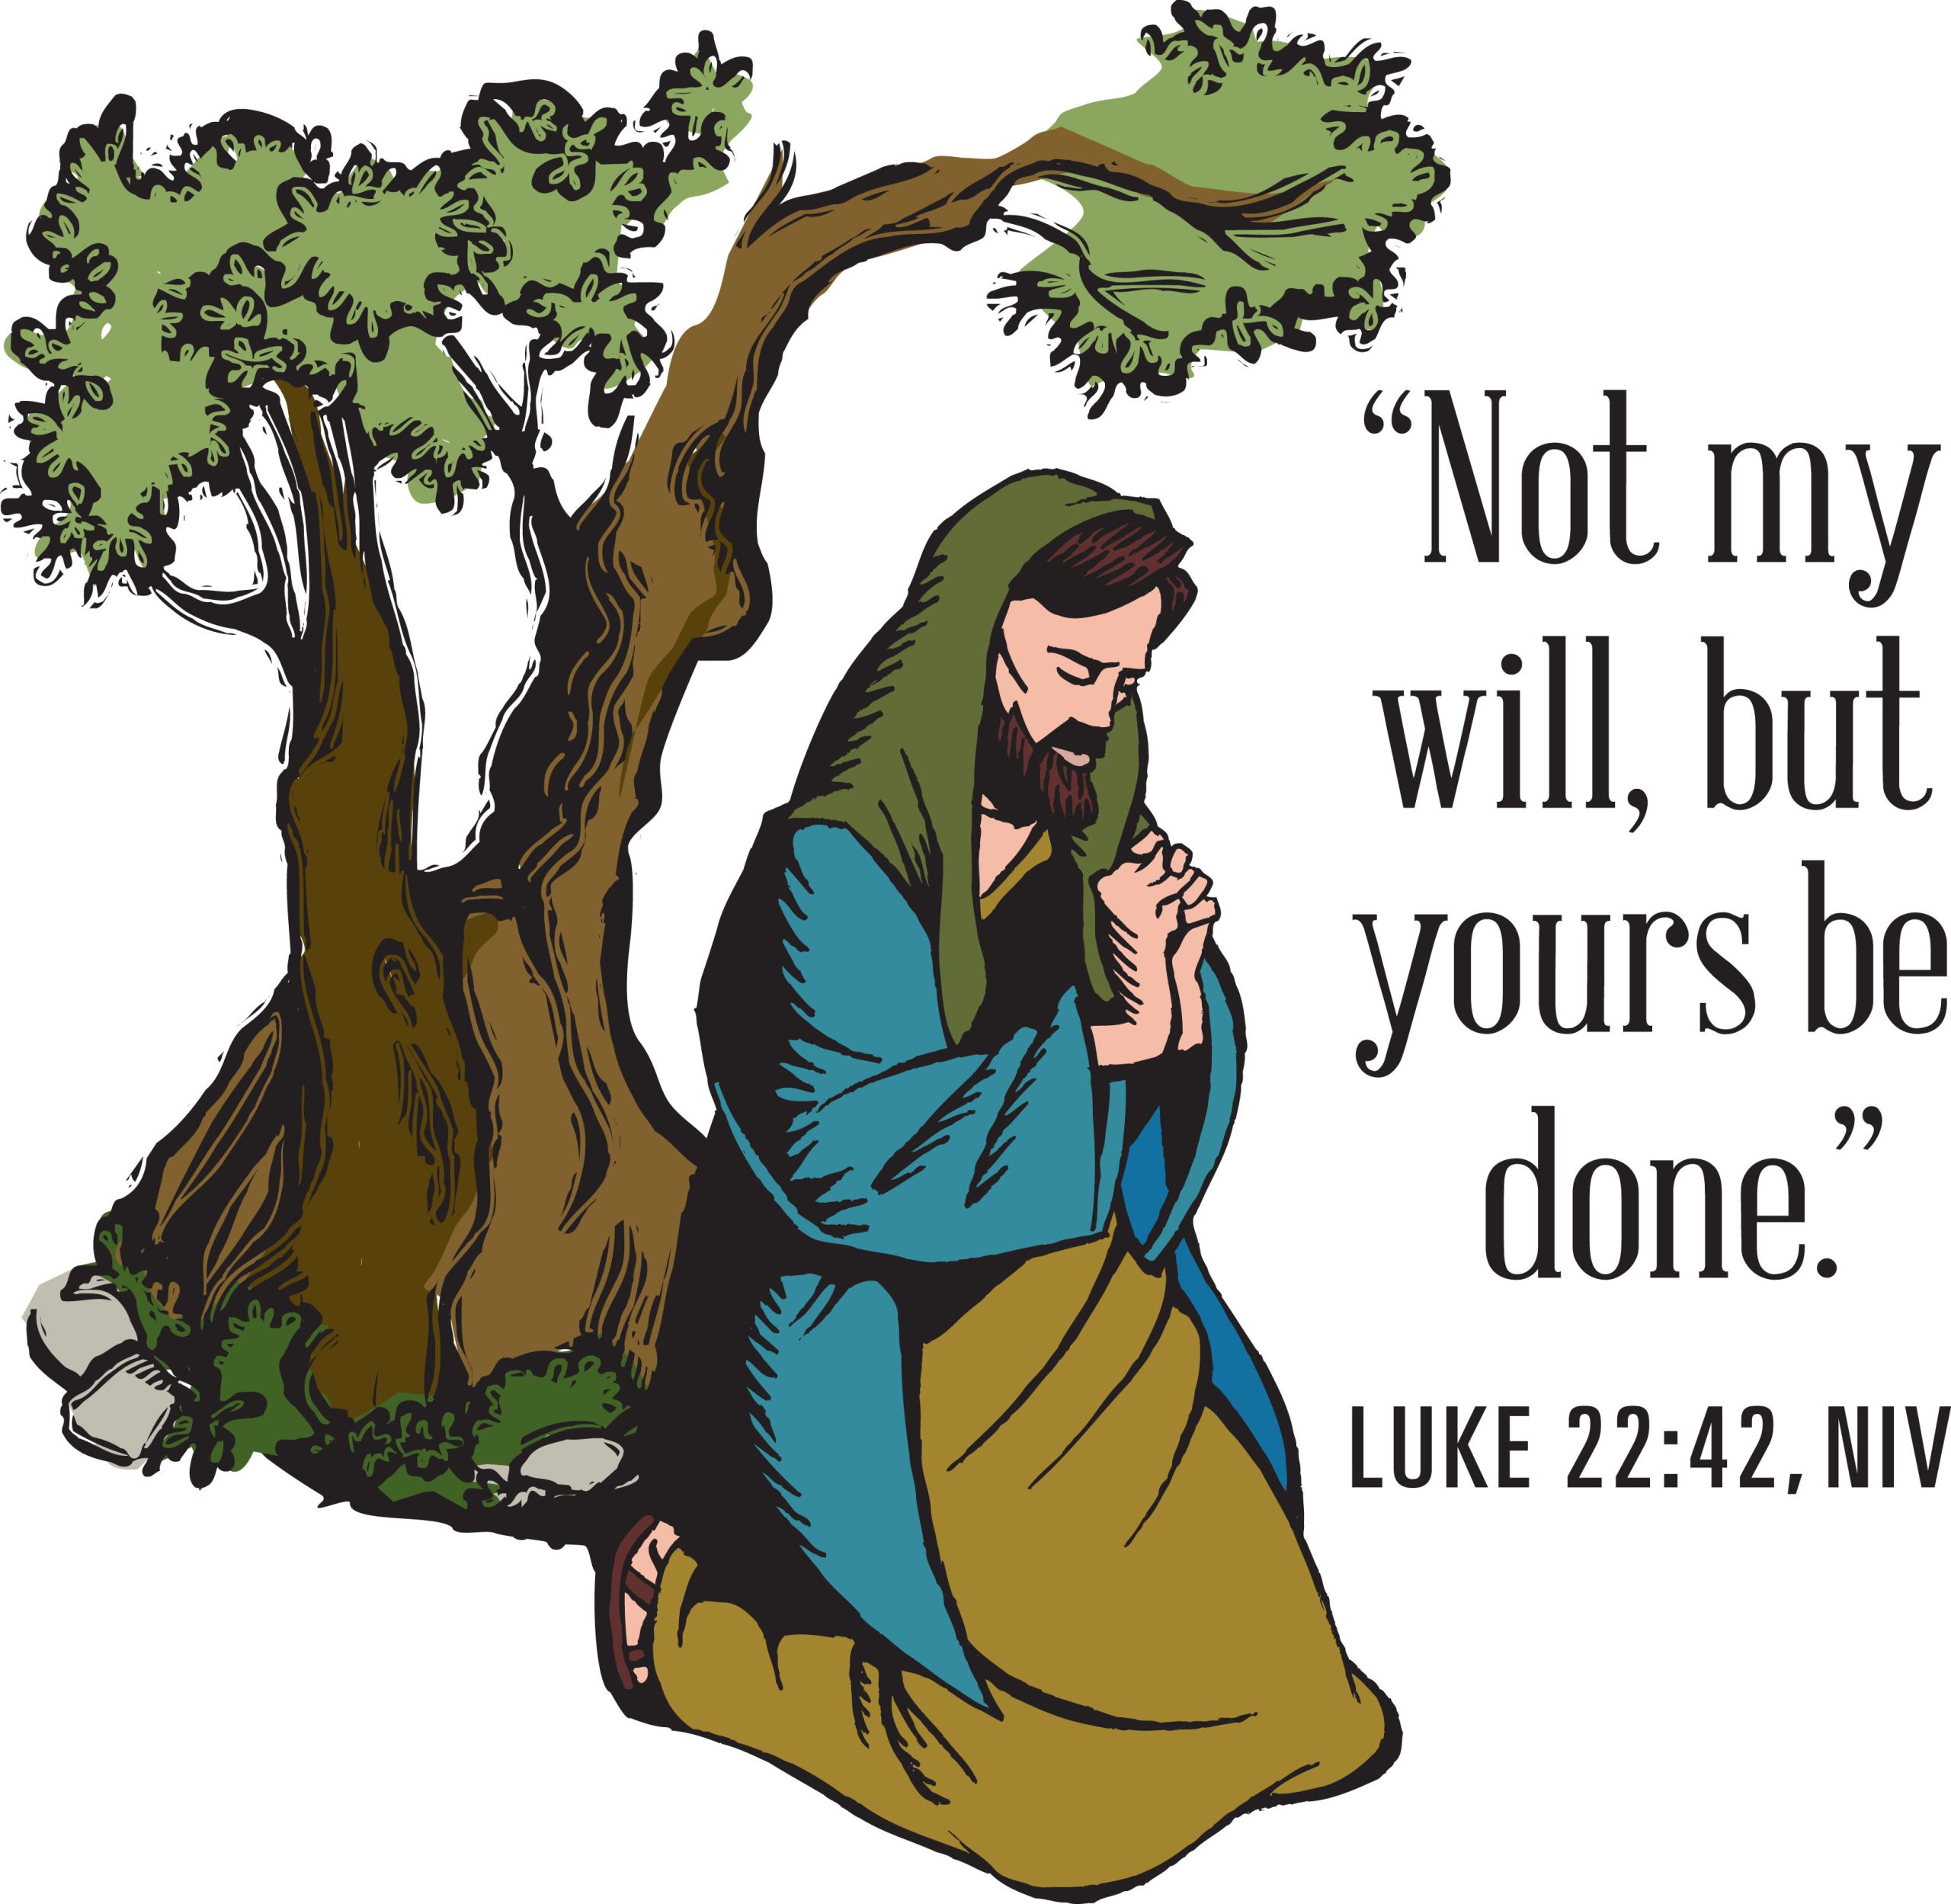 Jesus praying in the Garden of Gethsemane: Not my will, but Yours,